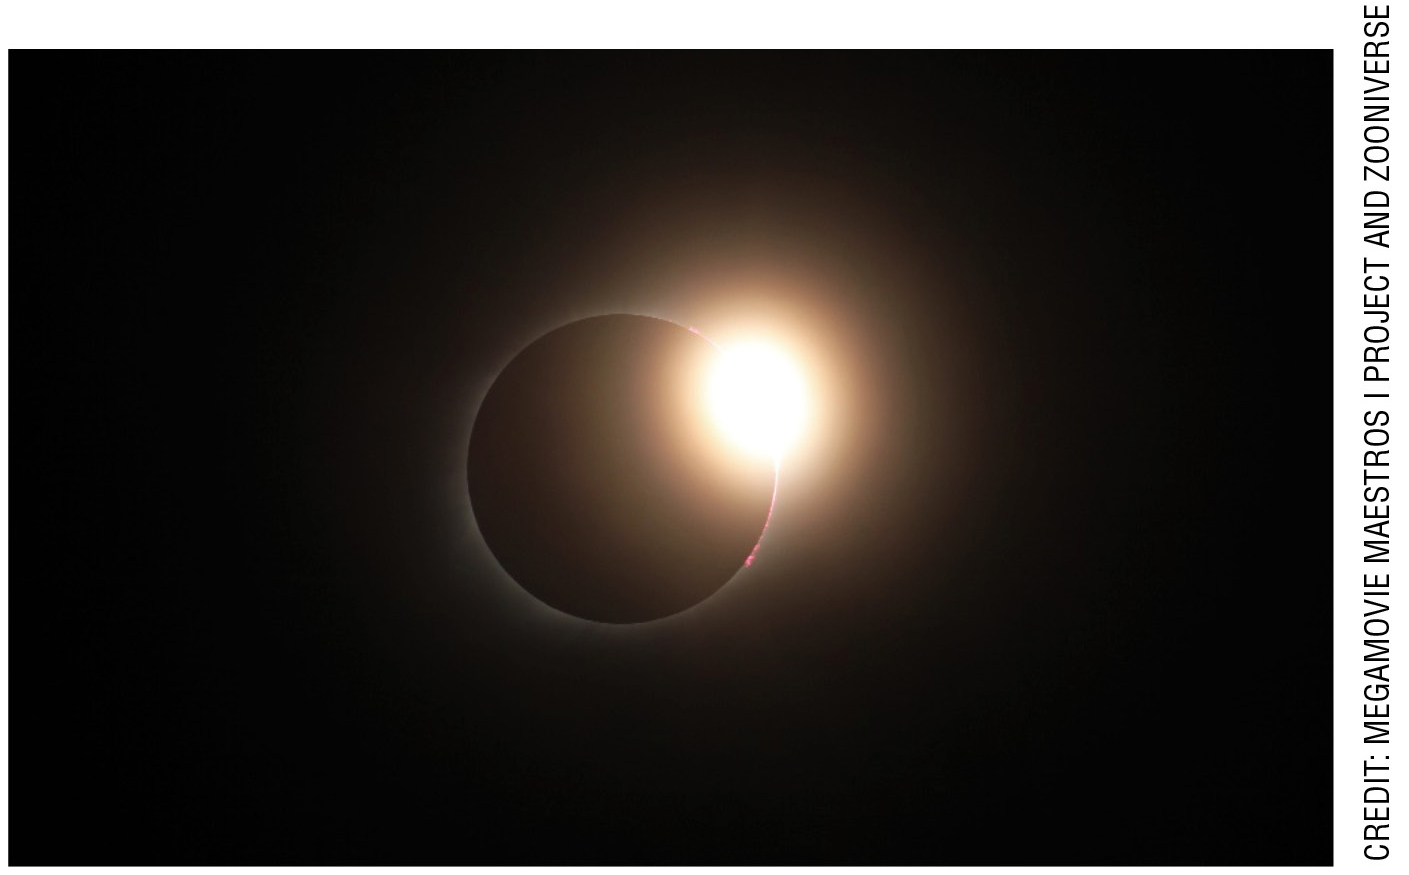 Figure 1 Image of the Diamond Ring Effect during a solar eclipse.